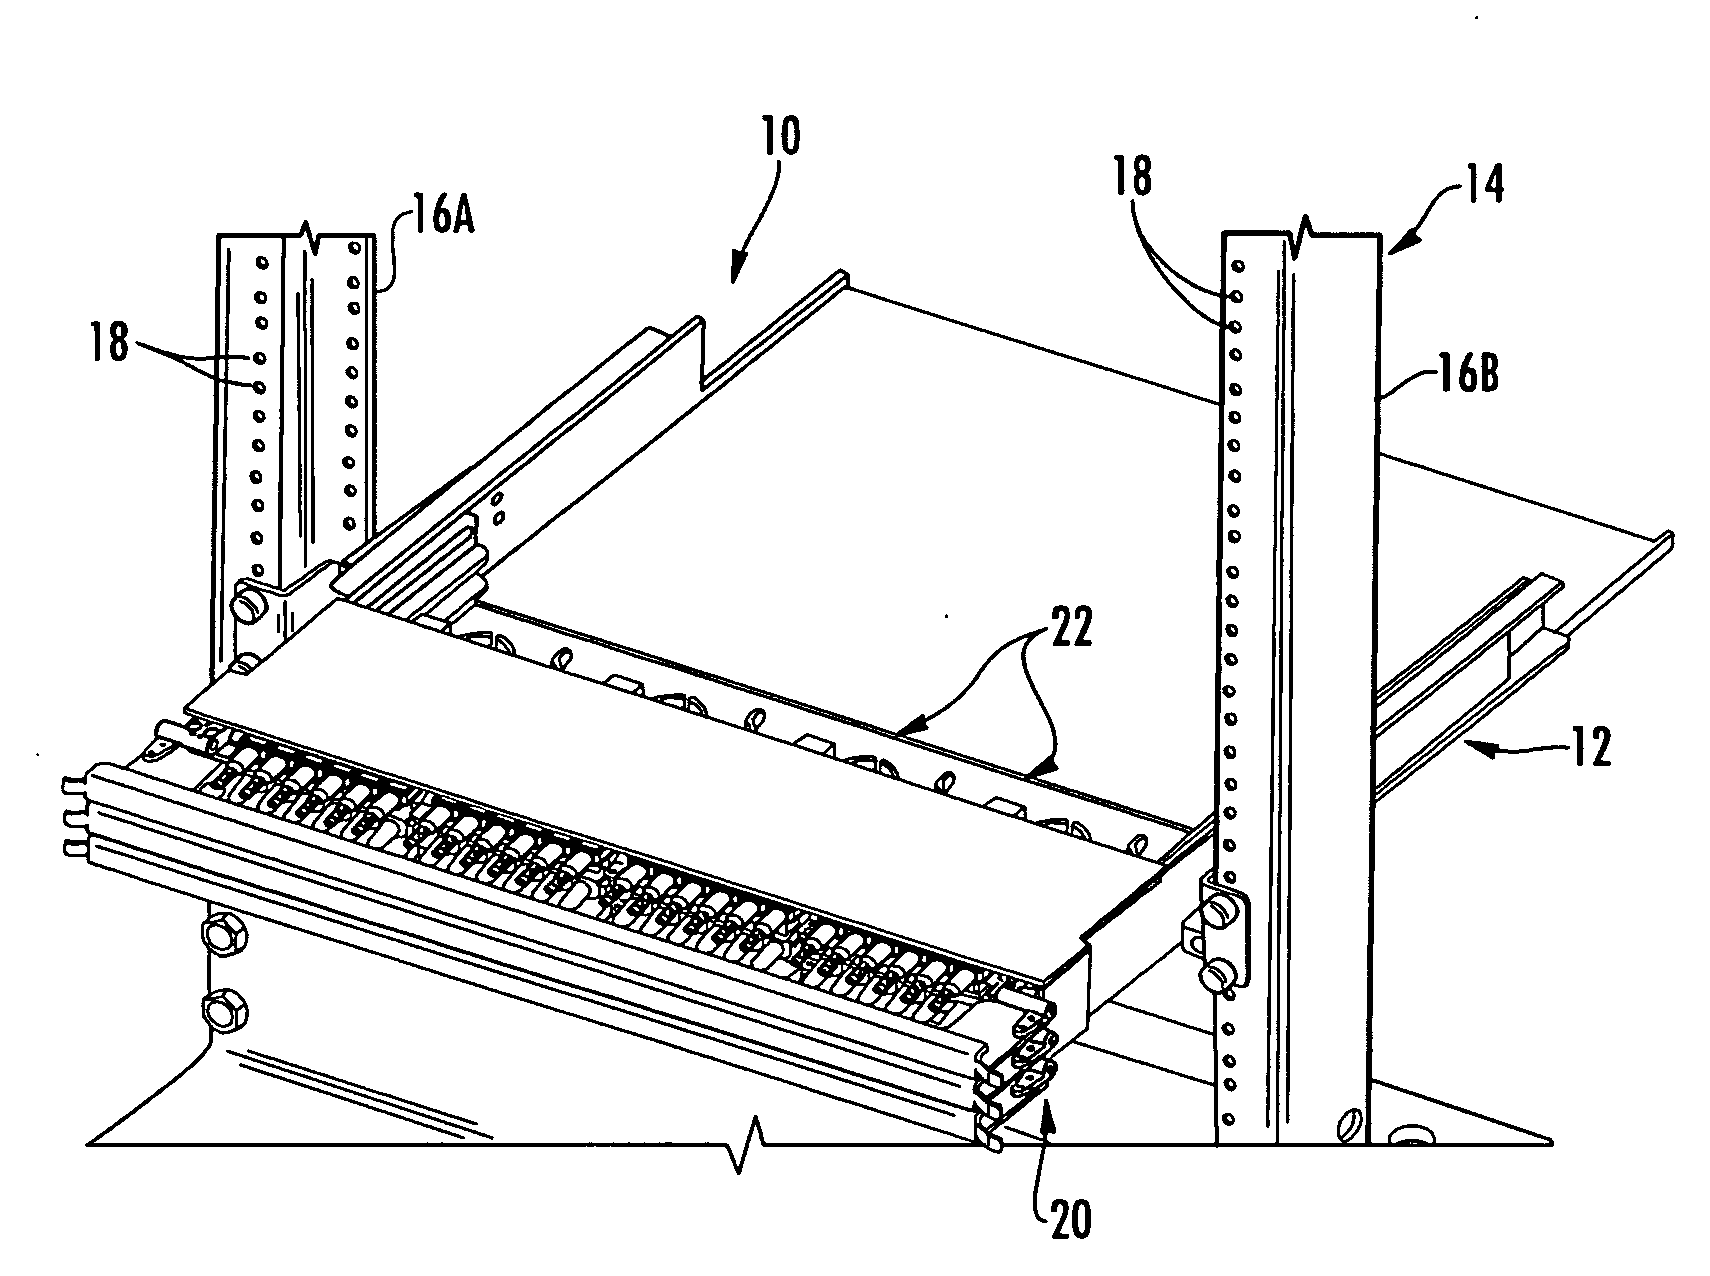 Rear-Slidable Extension in a Fiber Optic Equipment Tray